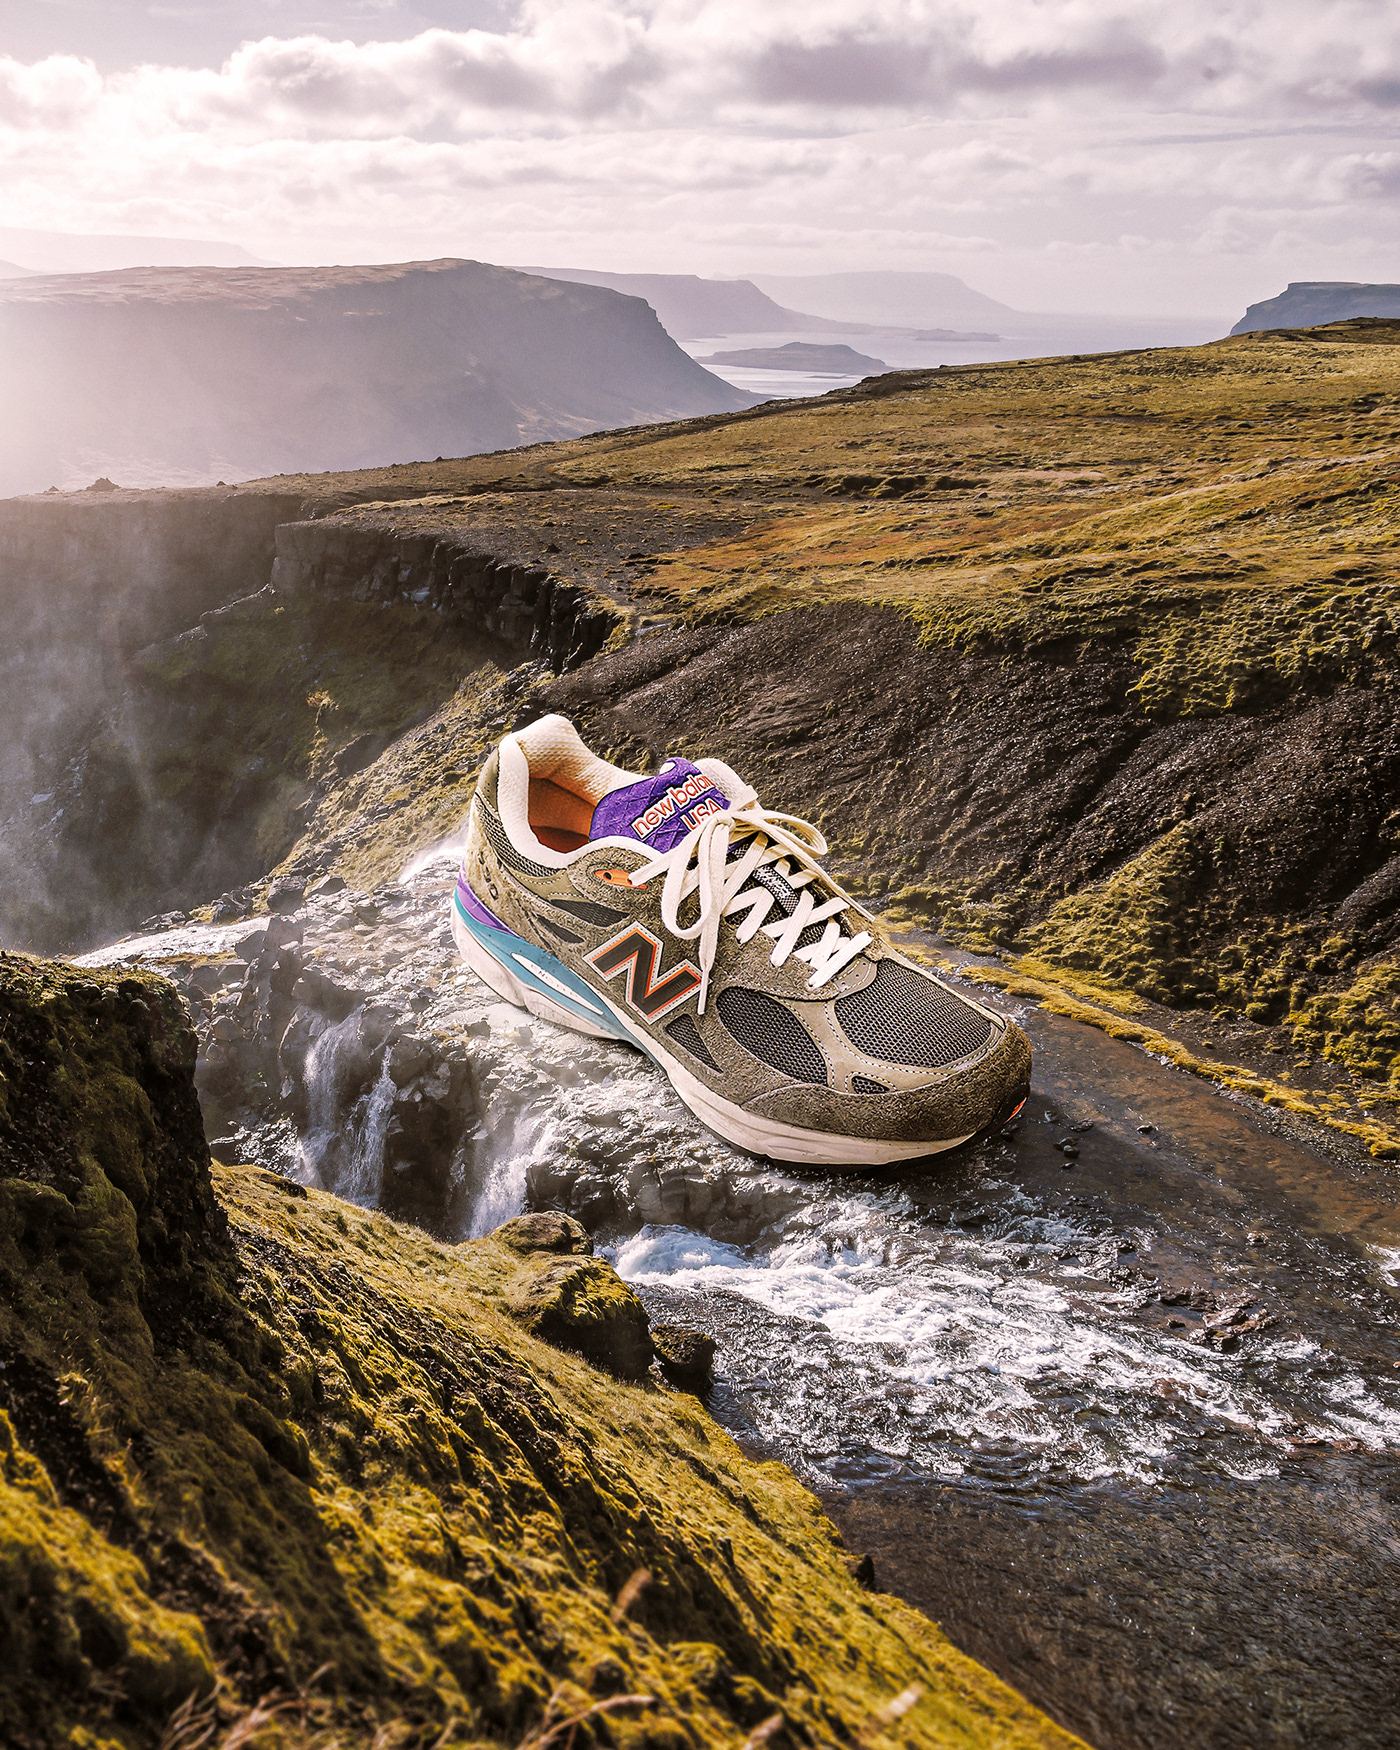 Giant sneaker photo composite next to a waterfall . Retouching using Photoshop